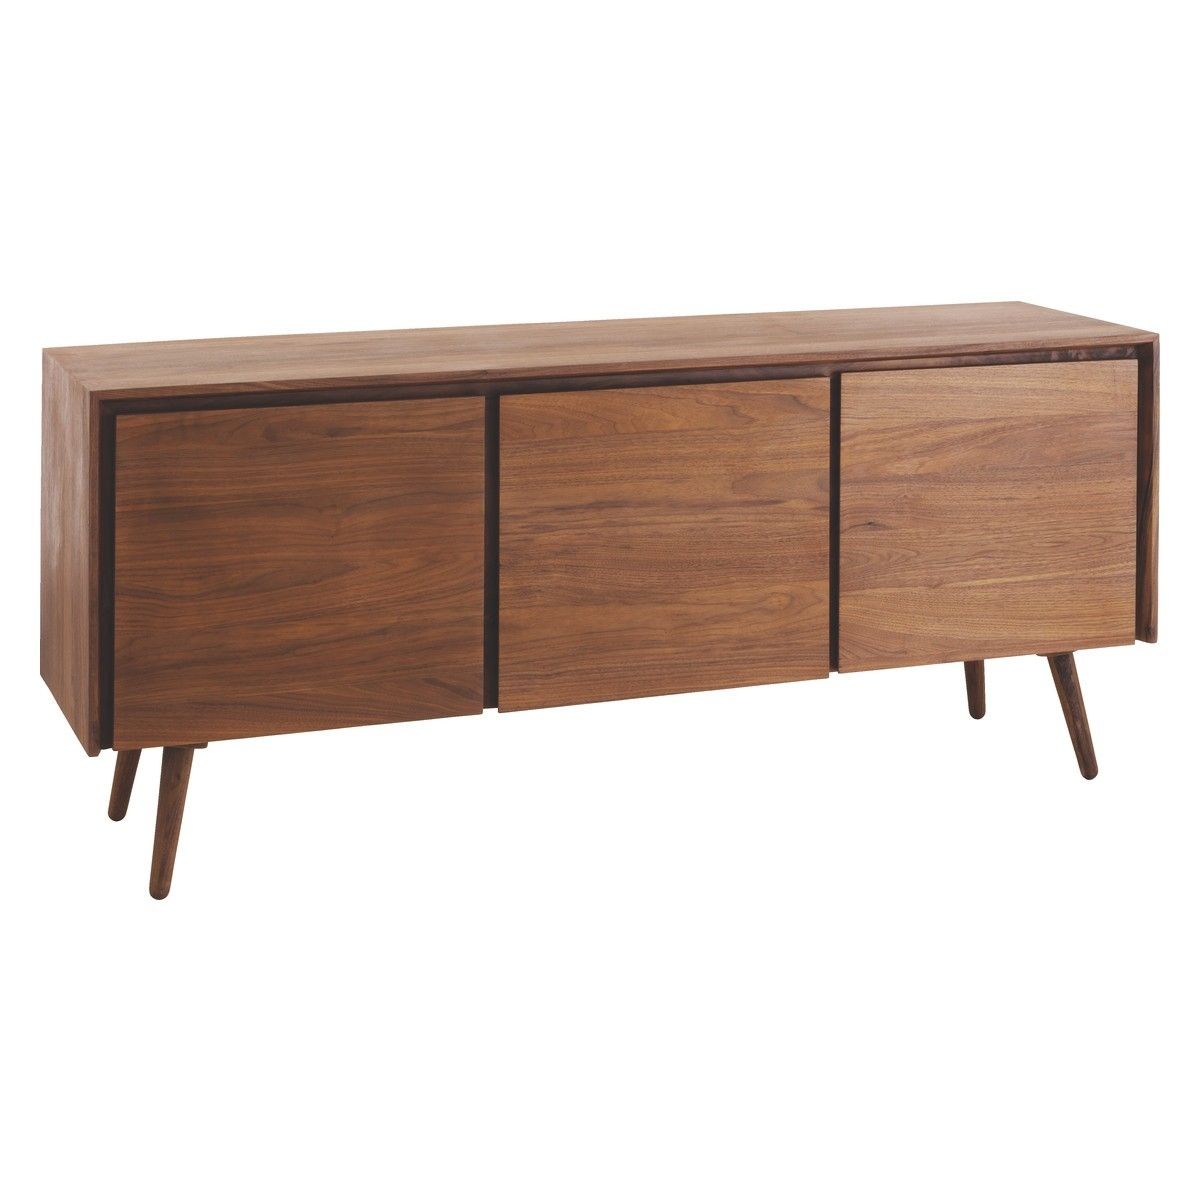 Vince Walnut 3 Door Mid Century Sideboard | Buy Now At Habitat Uk With Walnut Small Sideboards (View 24 of 30)